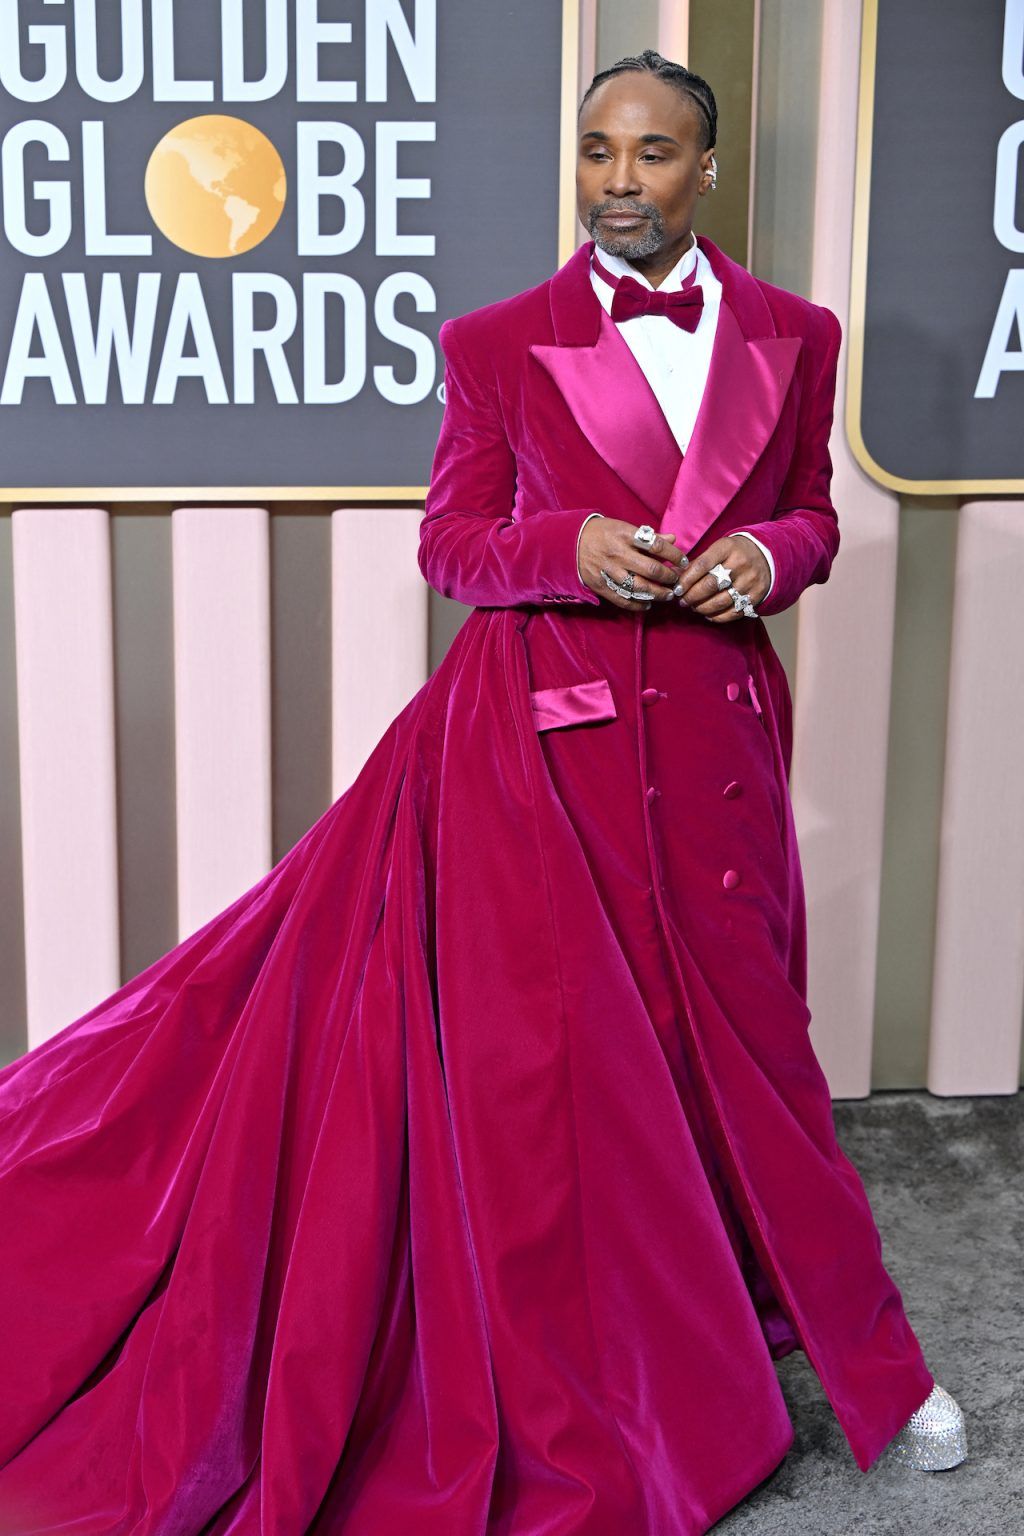 Golden Globes Best Dressed Most Glamorous Looks On The Red Carpet